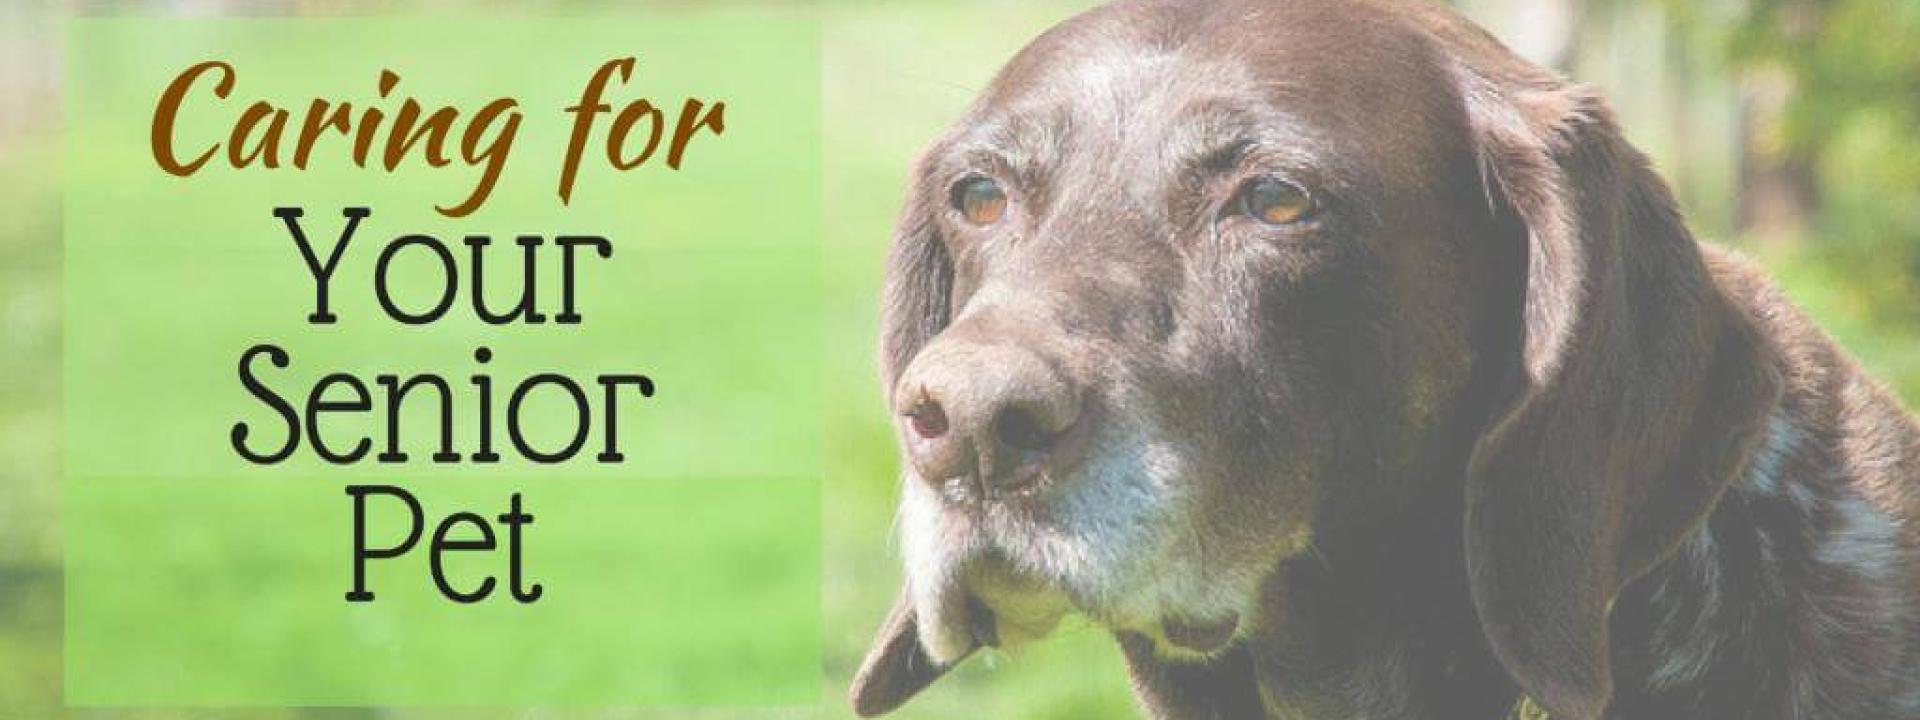 caring-for-your-senior-pet